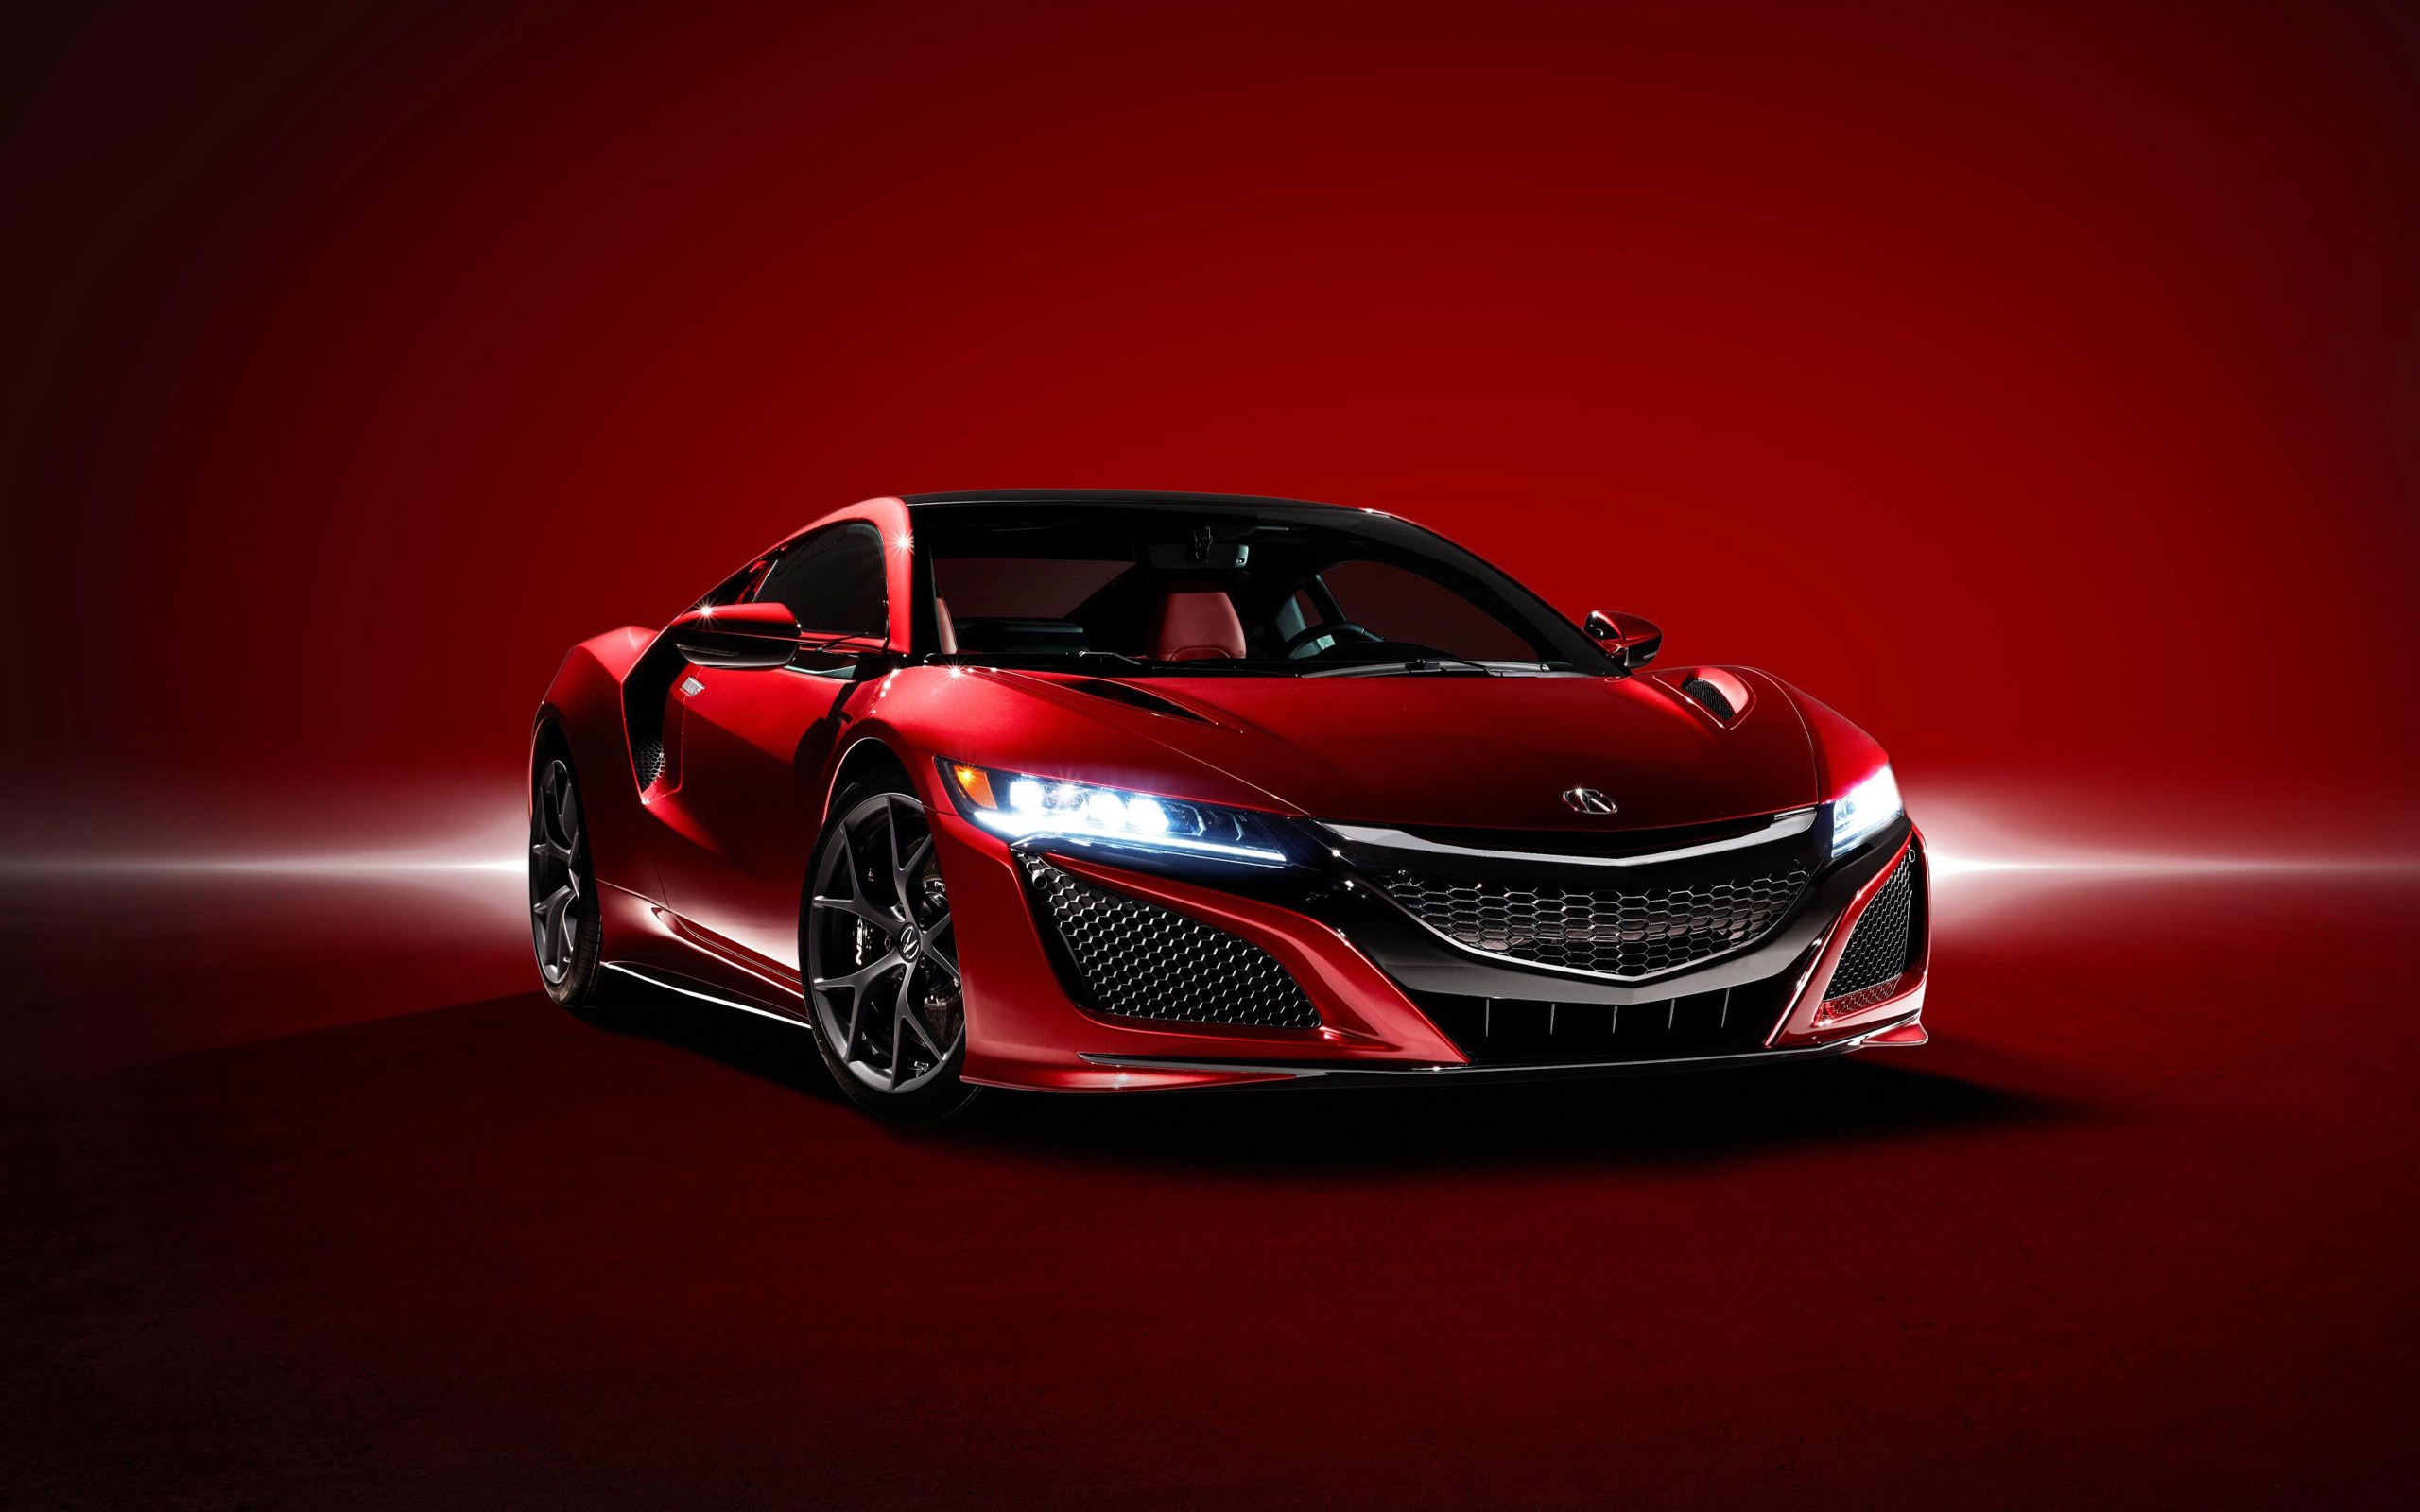 New Acura NSX Red Car Wallpaper Download High Quality